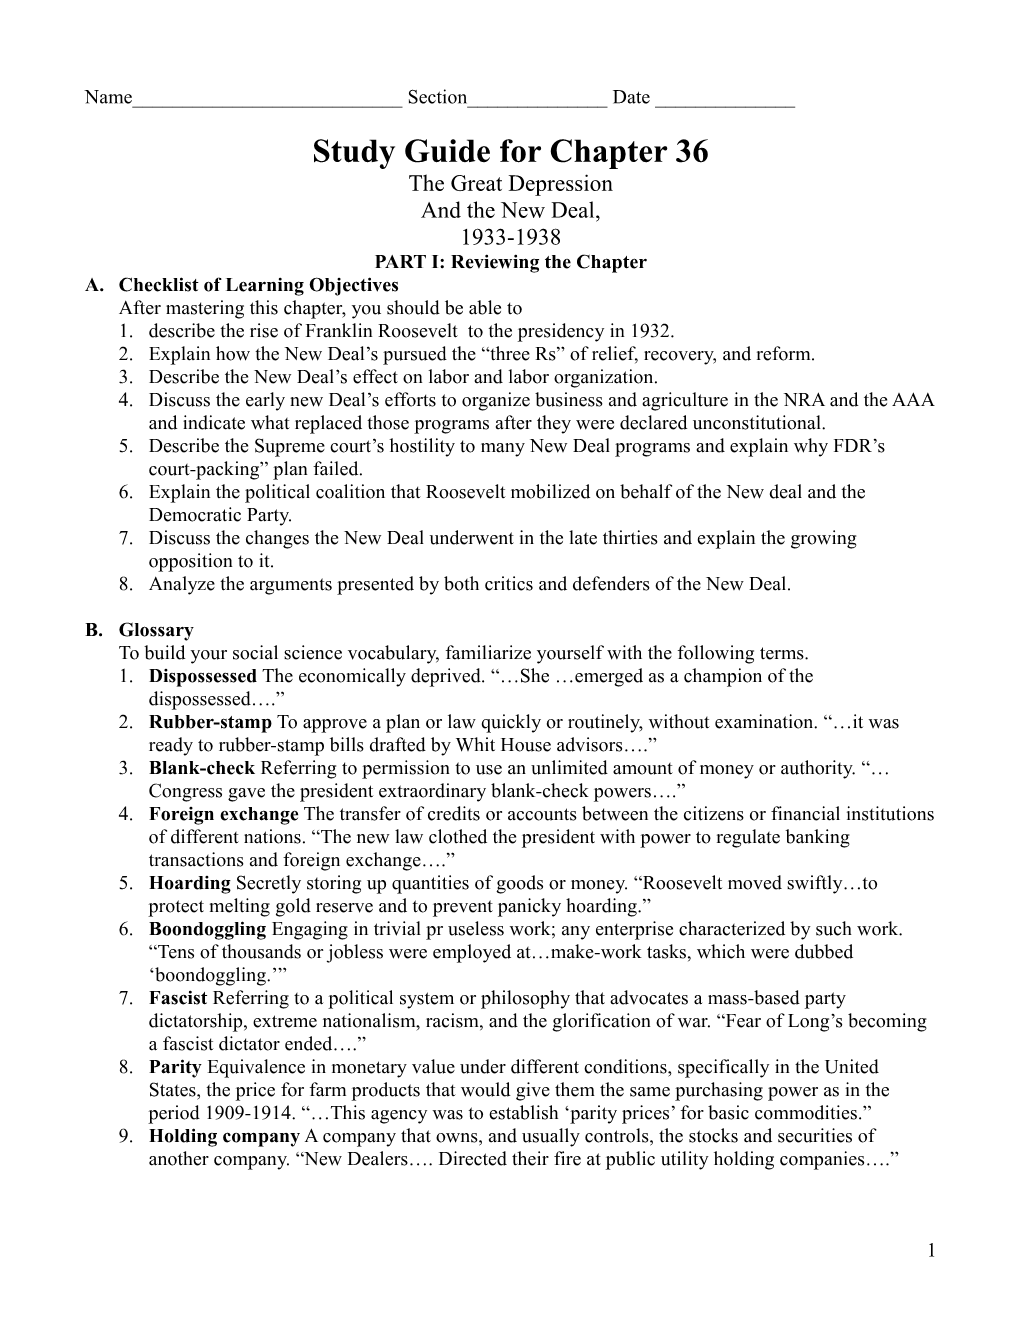 Study Guide for Chapter 36